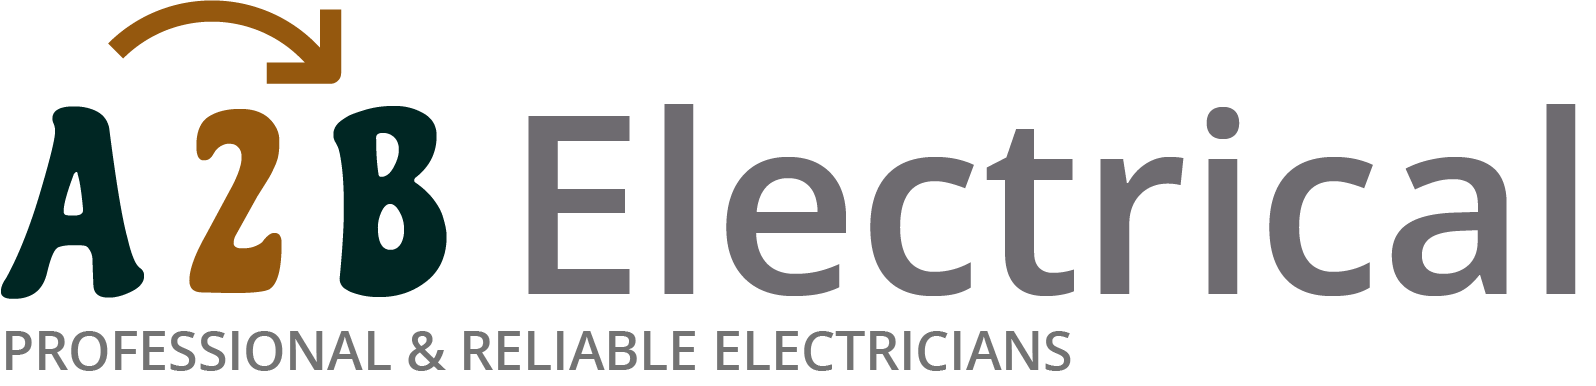 If you have electrical wiring problems in Moorthorpe, we can provide an electrician to have a look for you. 